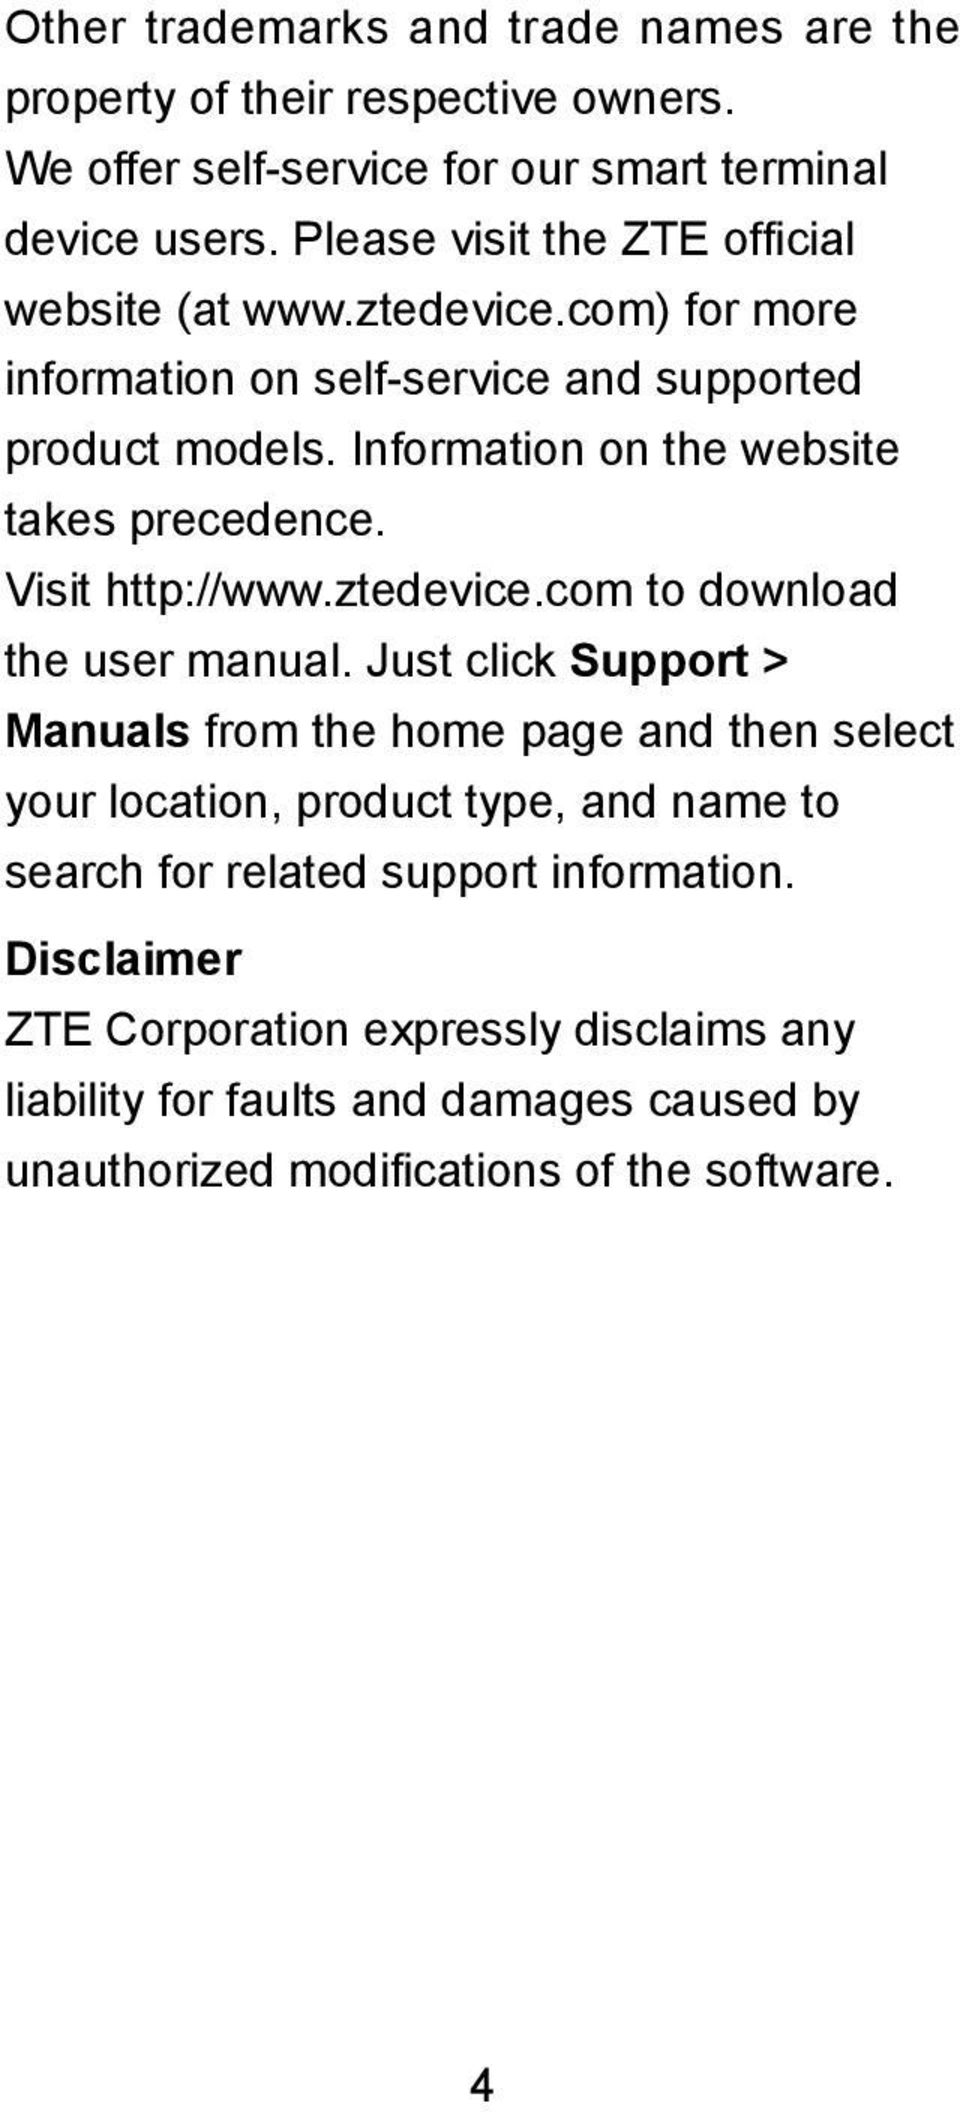 Information on the website takes precedence. Visit http://www.ztedevice.com to download the user manual.